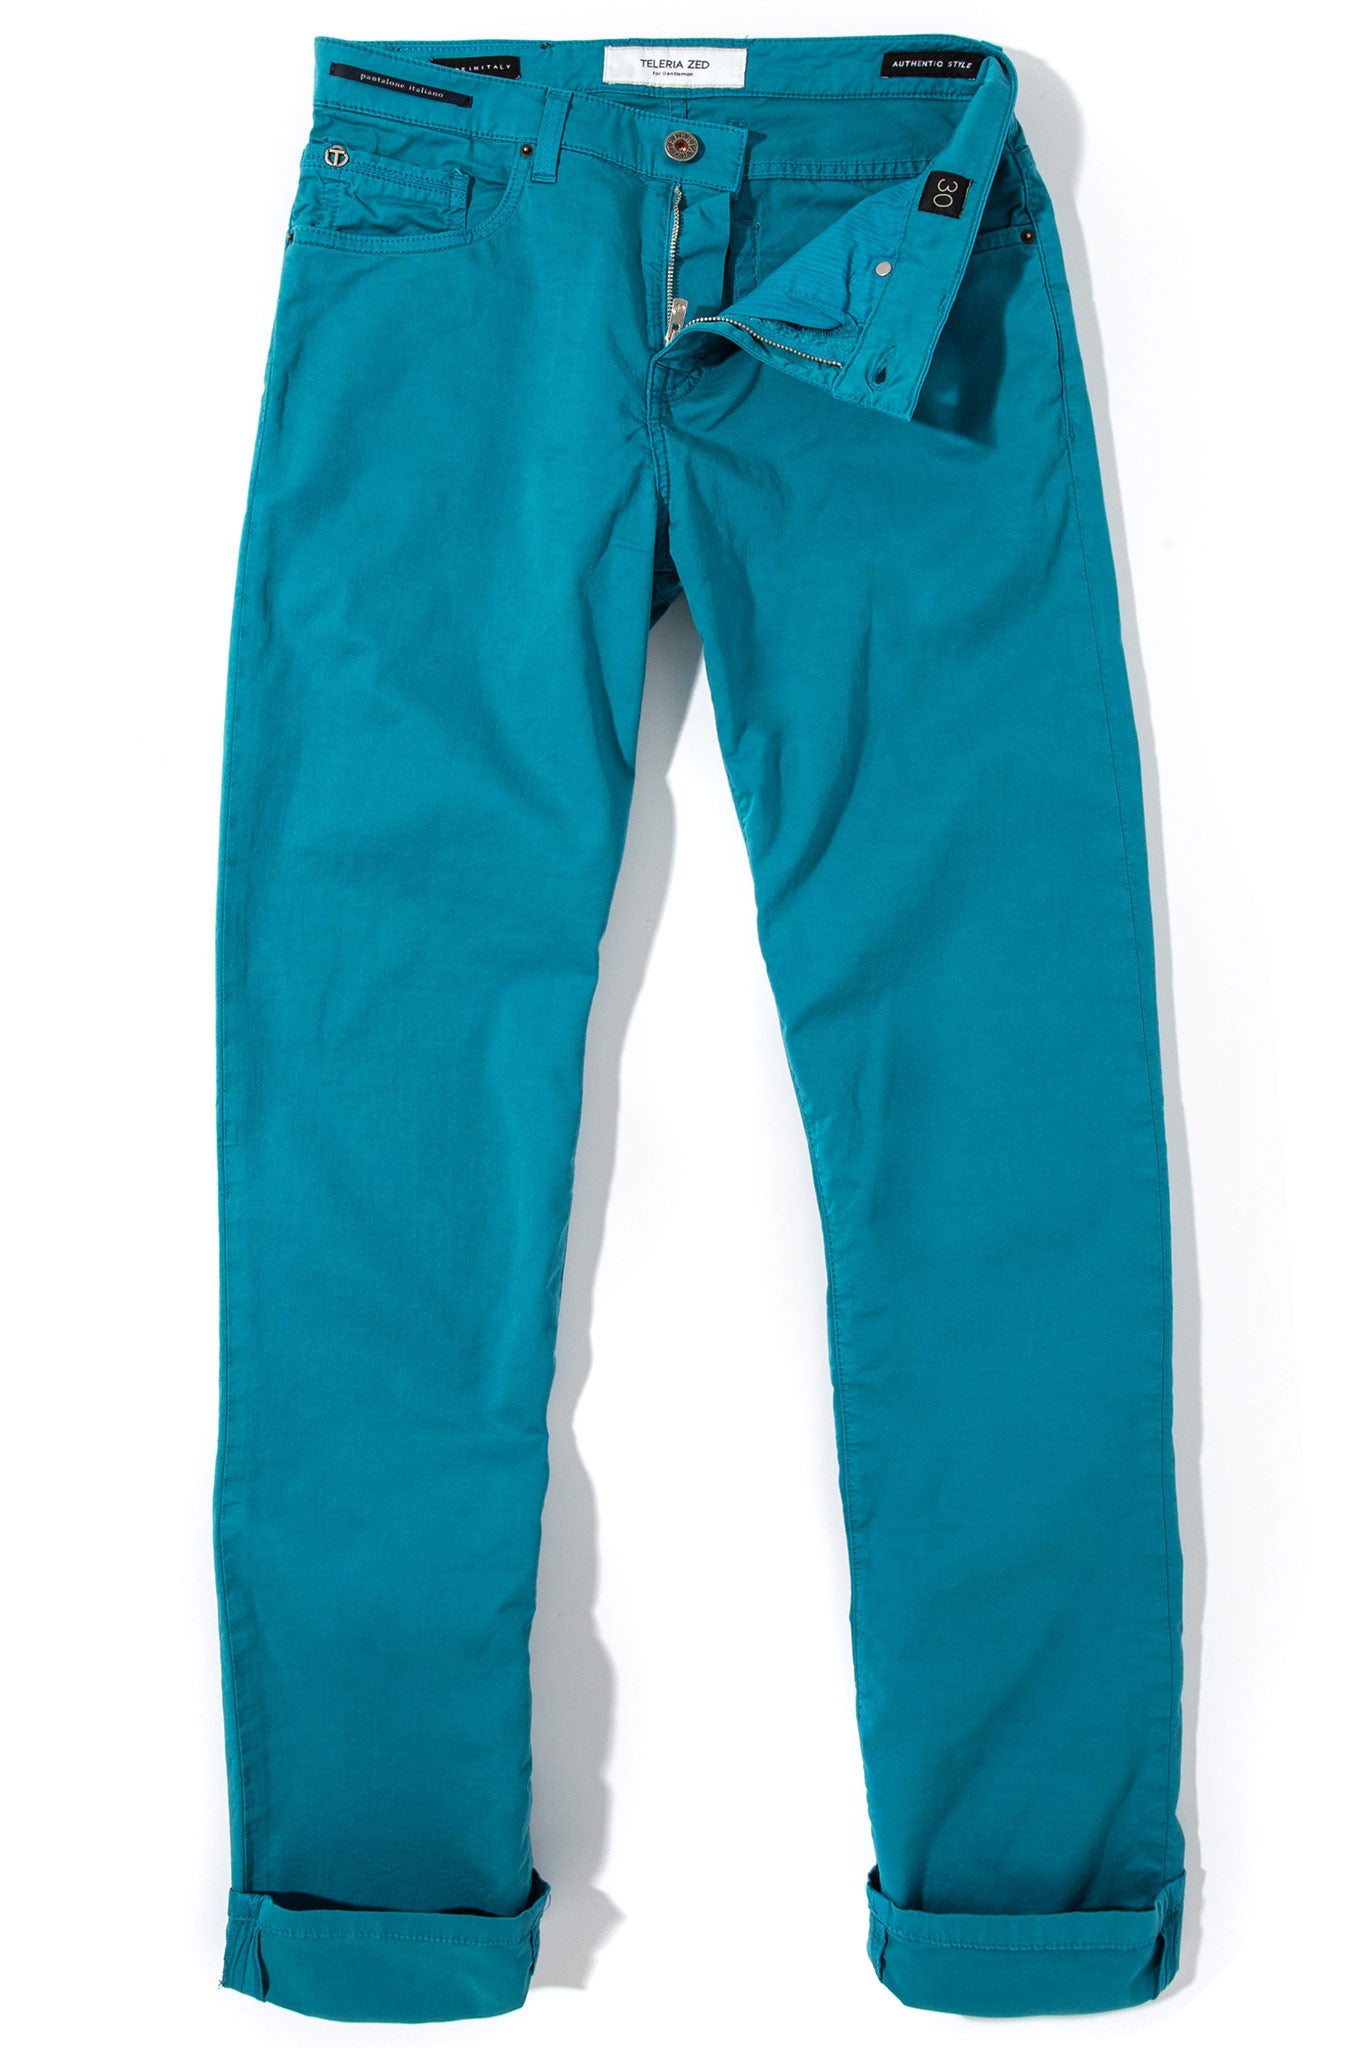 Fowler Ultralight Performance Pant In Biscay Blue | Mens - Pants - 5 Pocket | Teleria Zed